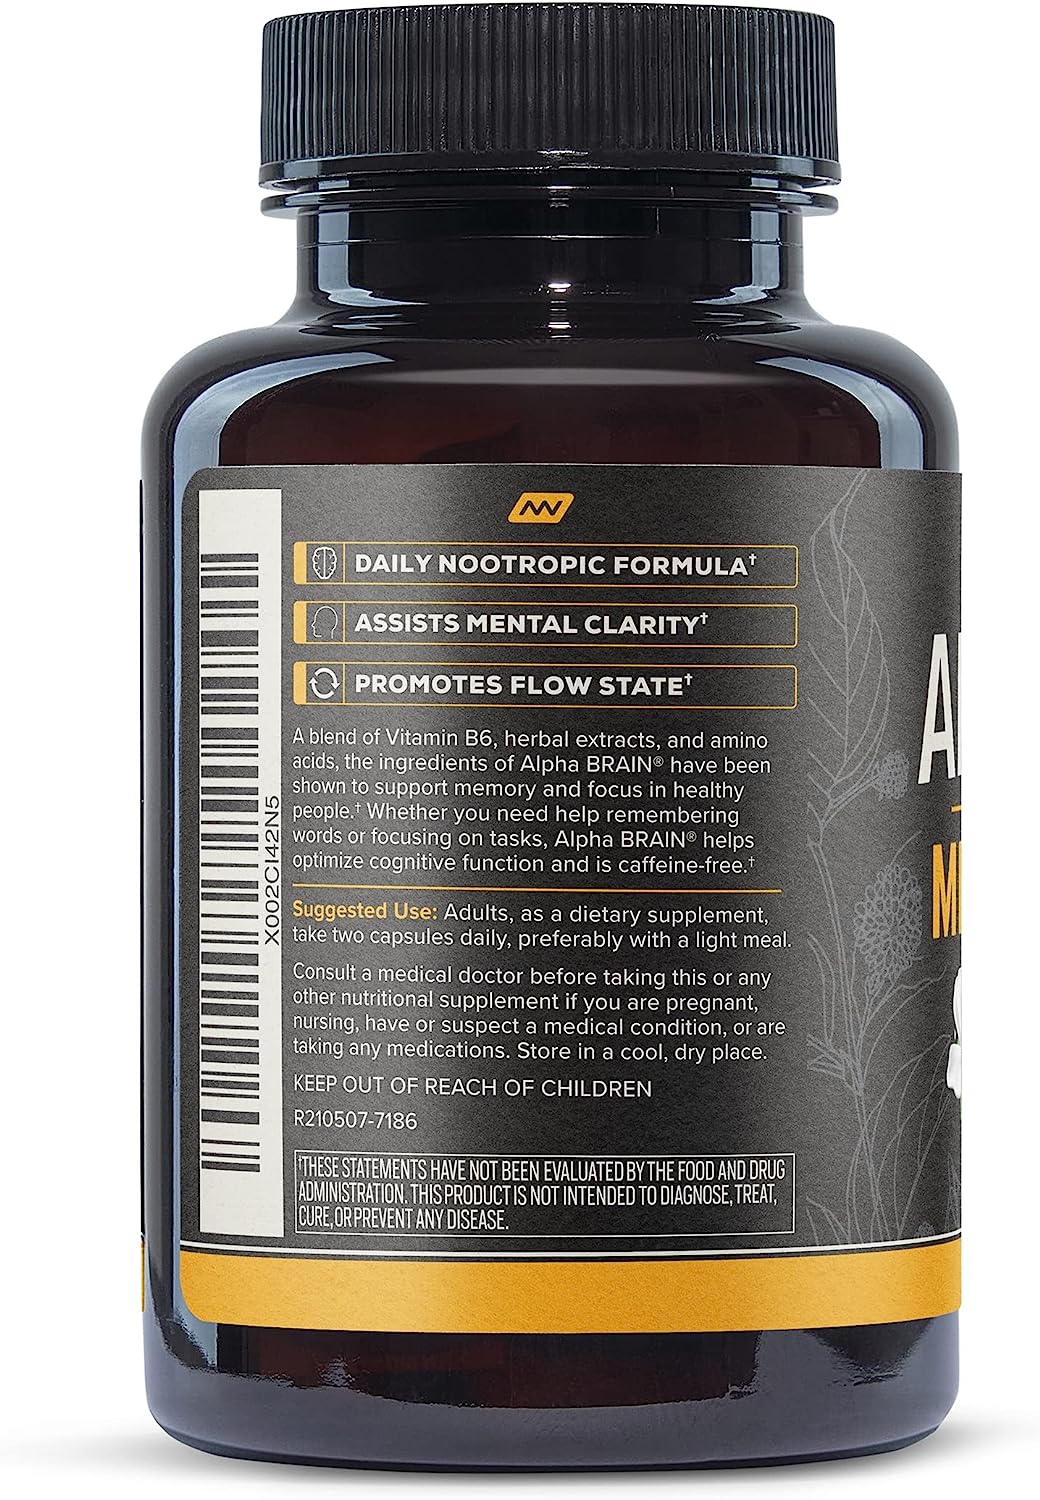 ONNIT Alpha Brain Premium Nootropic Brain Supplement, 30 Count, for Men & Women - Caffeine-Free Focus Capsules for Concentration, Brain Booster& Memory Support - Cat's Claw, Bacopa, Oat Straw : Health & Household